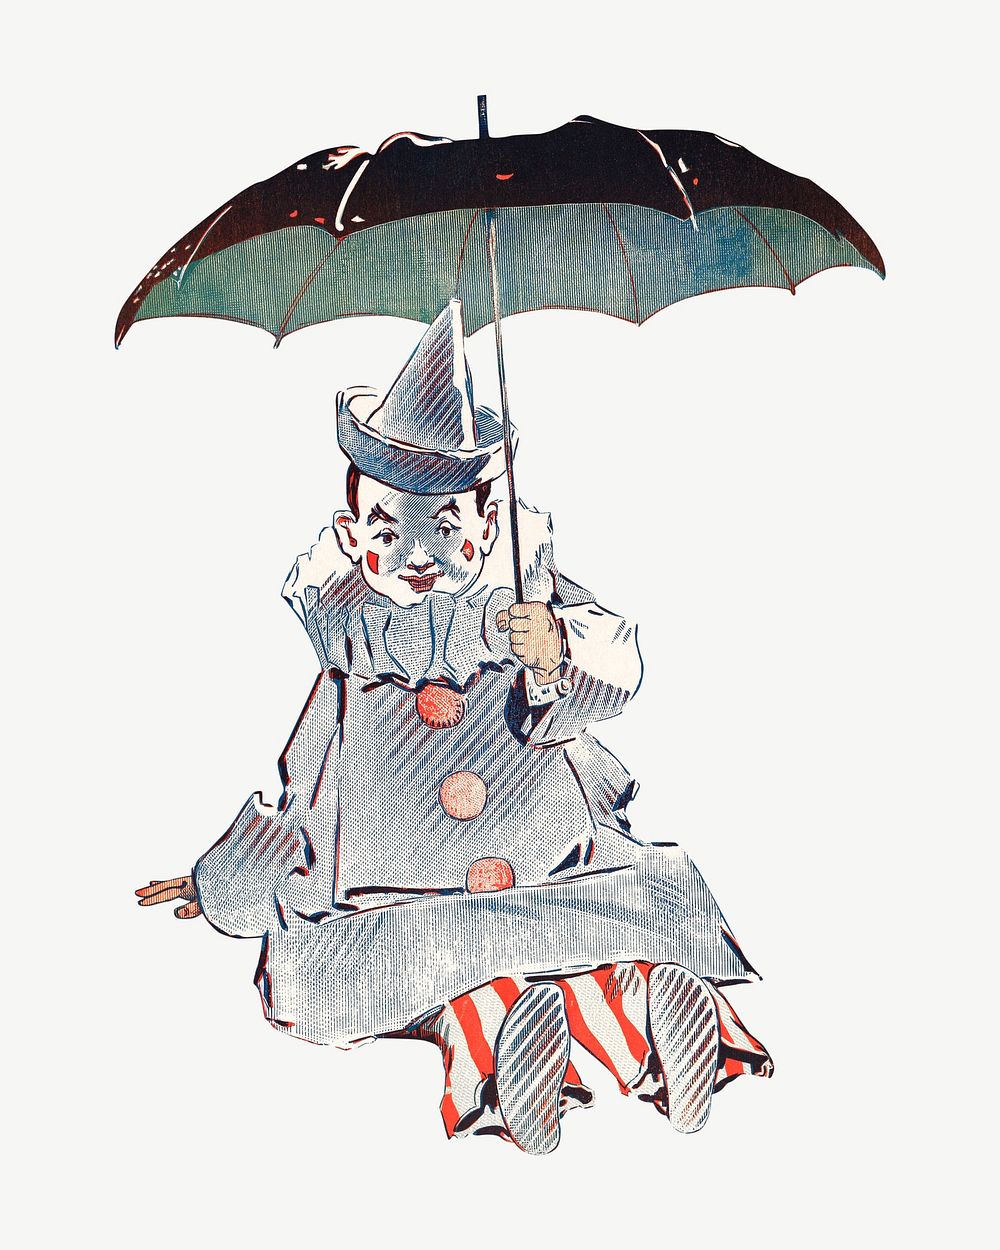 Clown holding umbrella, vintage illustration by George Reiter Brill psd.  Remixed by rawpixel. 